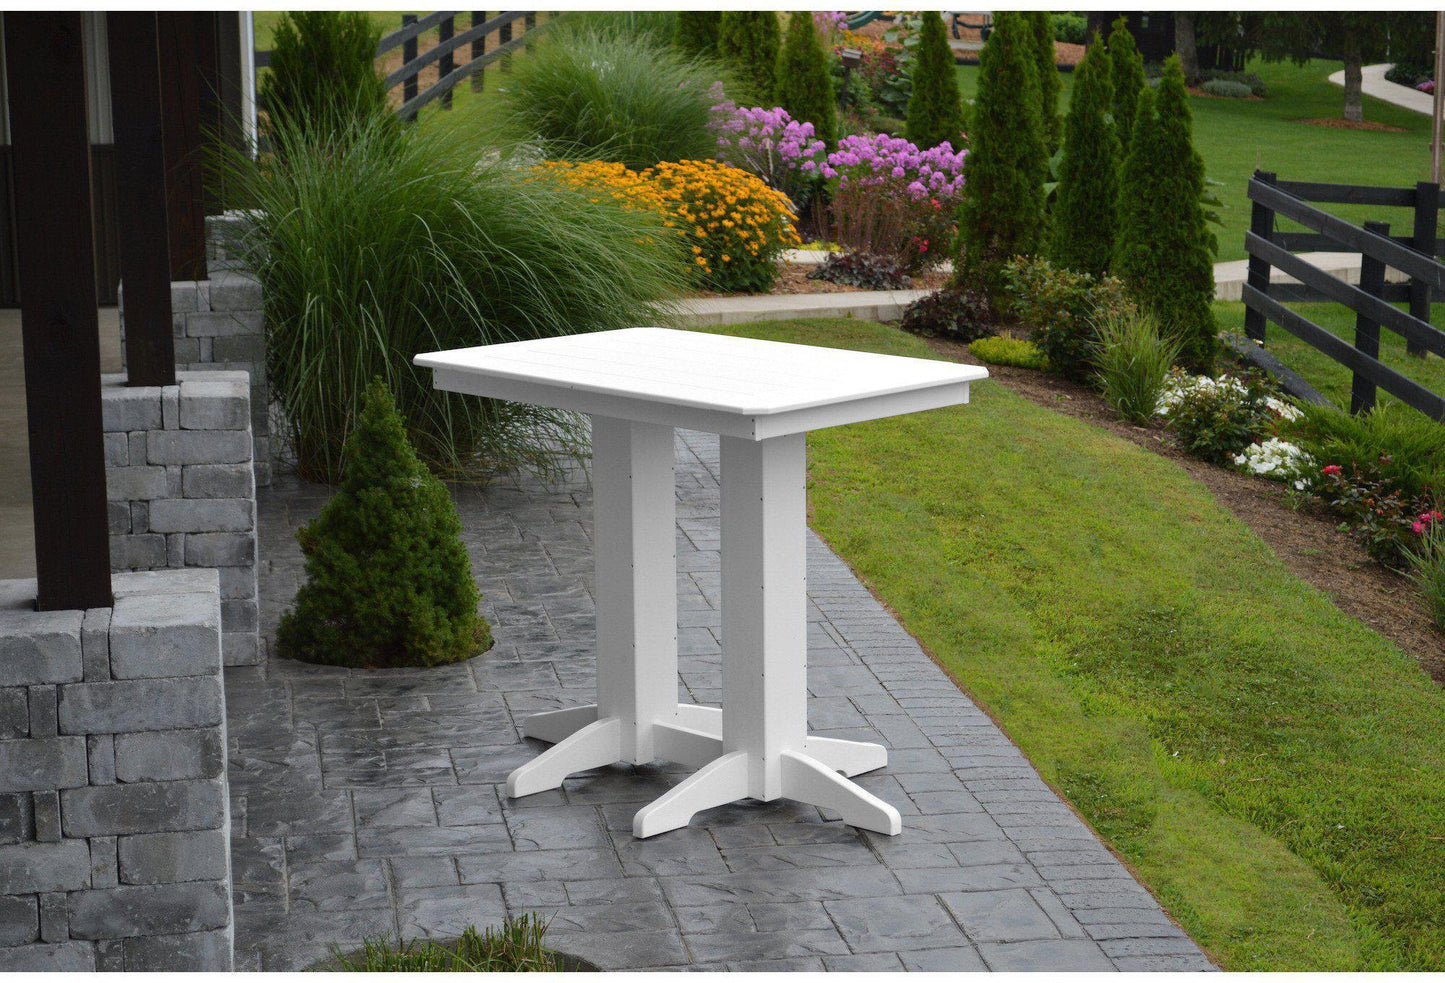 A&L Furniture Recycled Plastic 48" x 33"  Bar Table - White